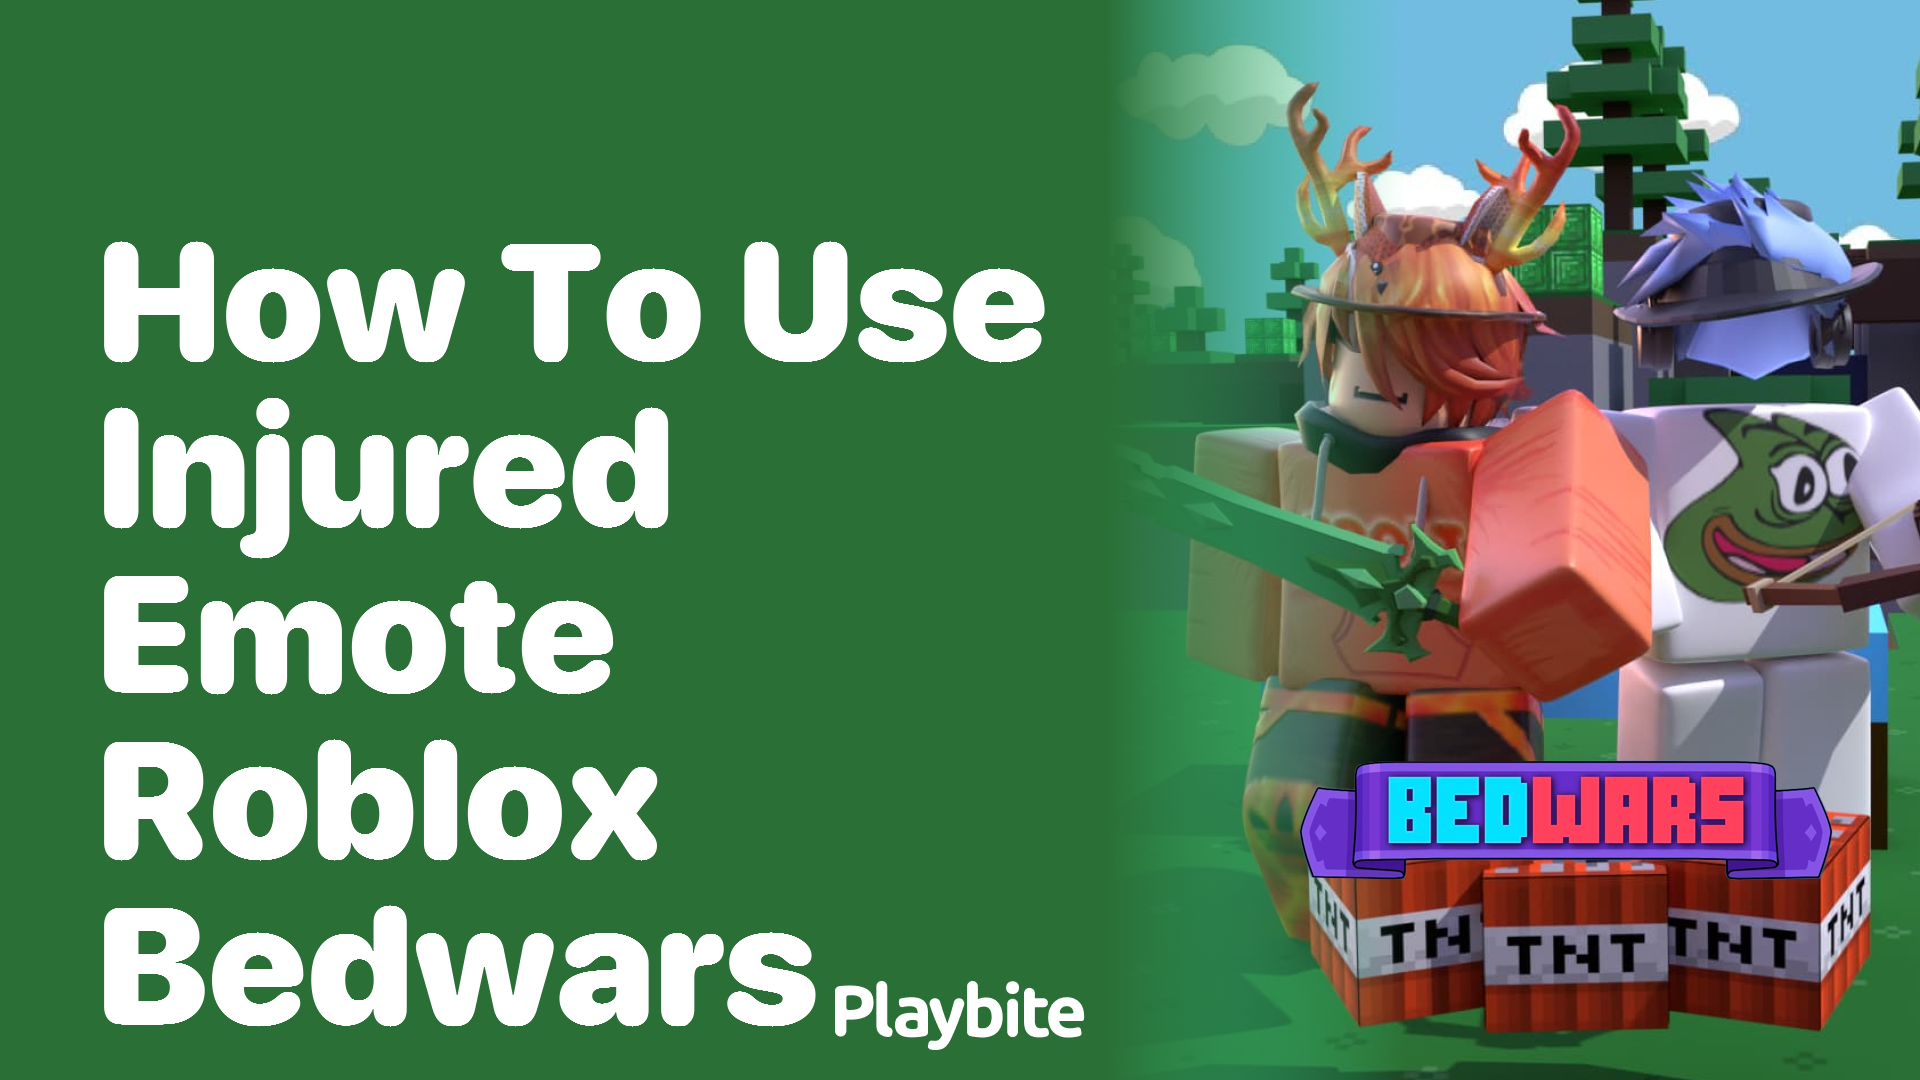 How to Use the Injured Emote in Roblox Bedwars